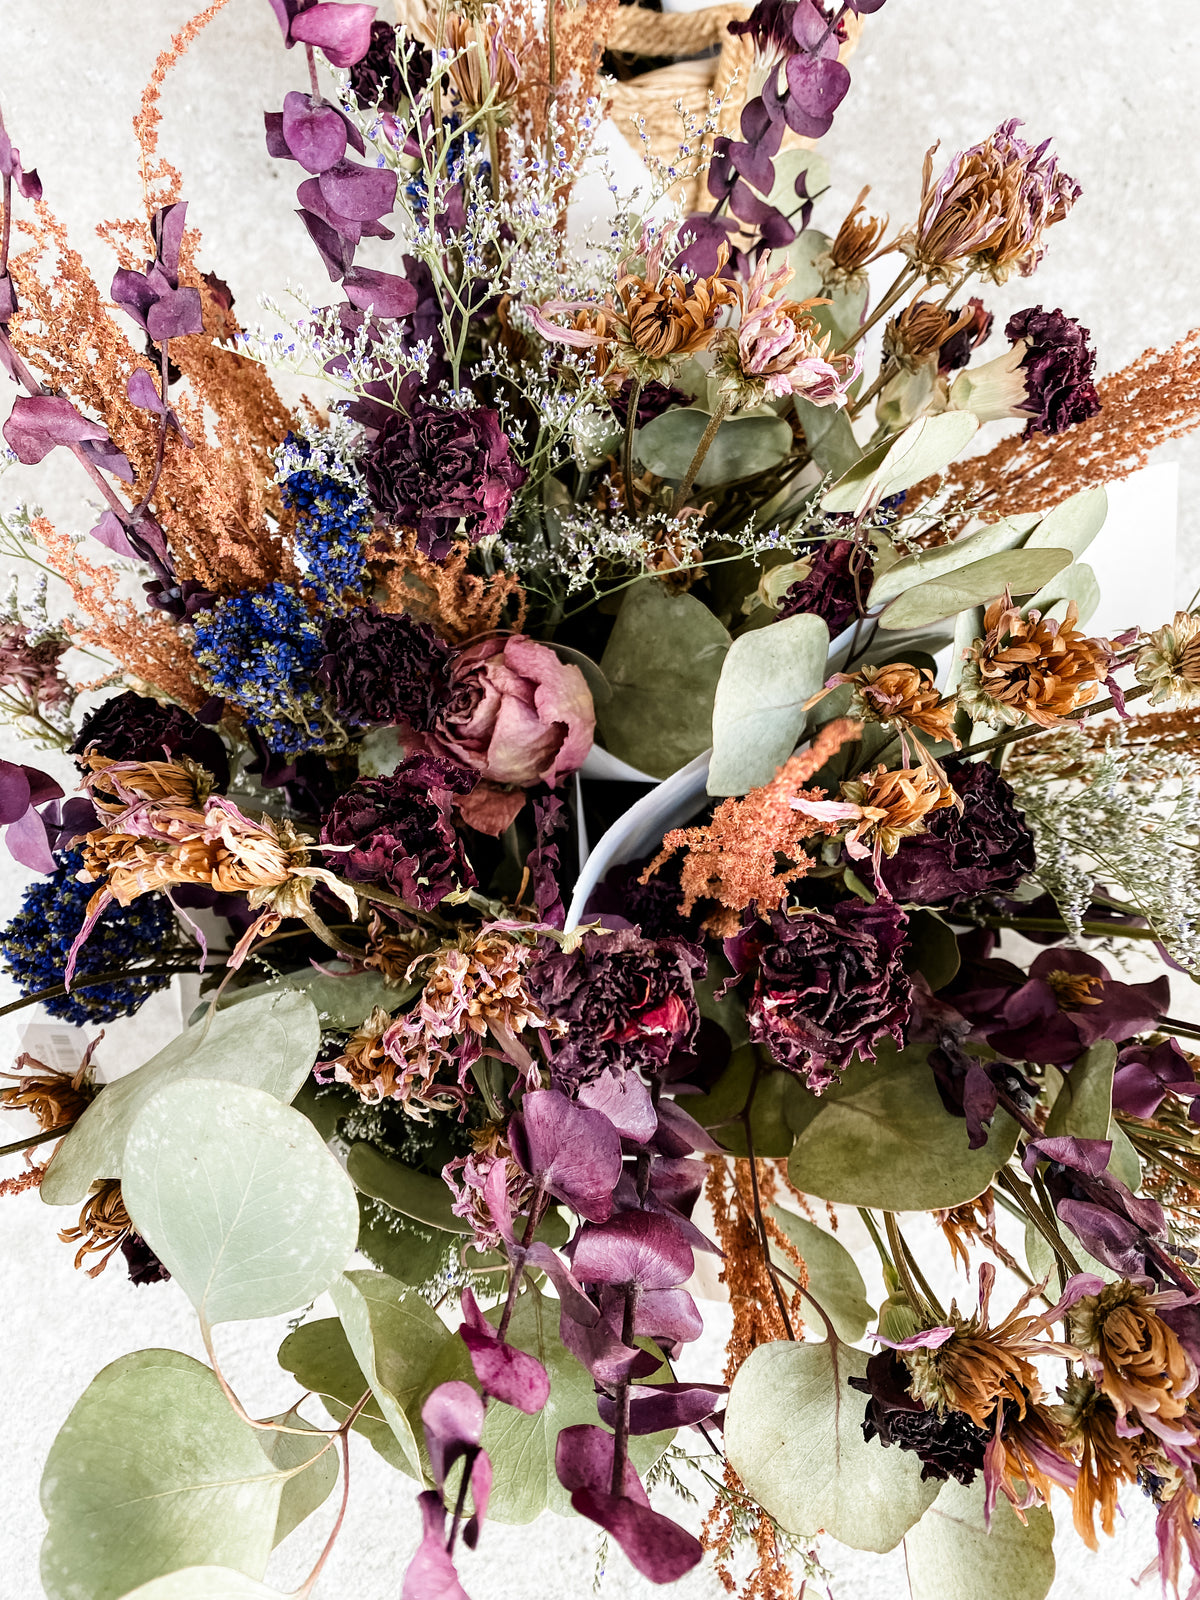 Dried Flower Bouquet - Dark and Moody